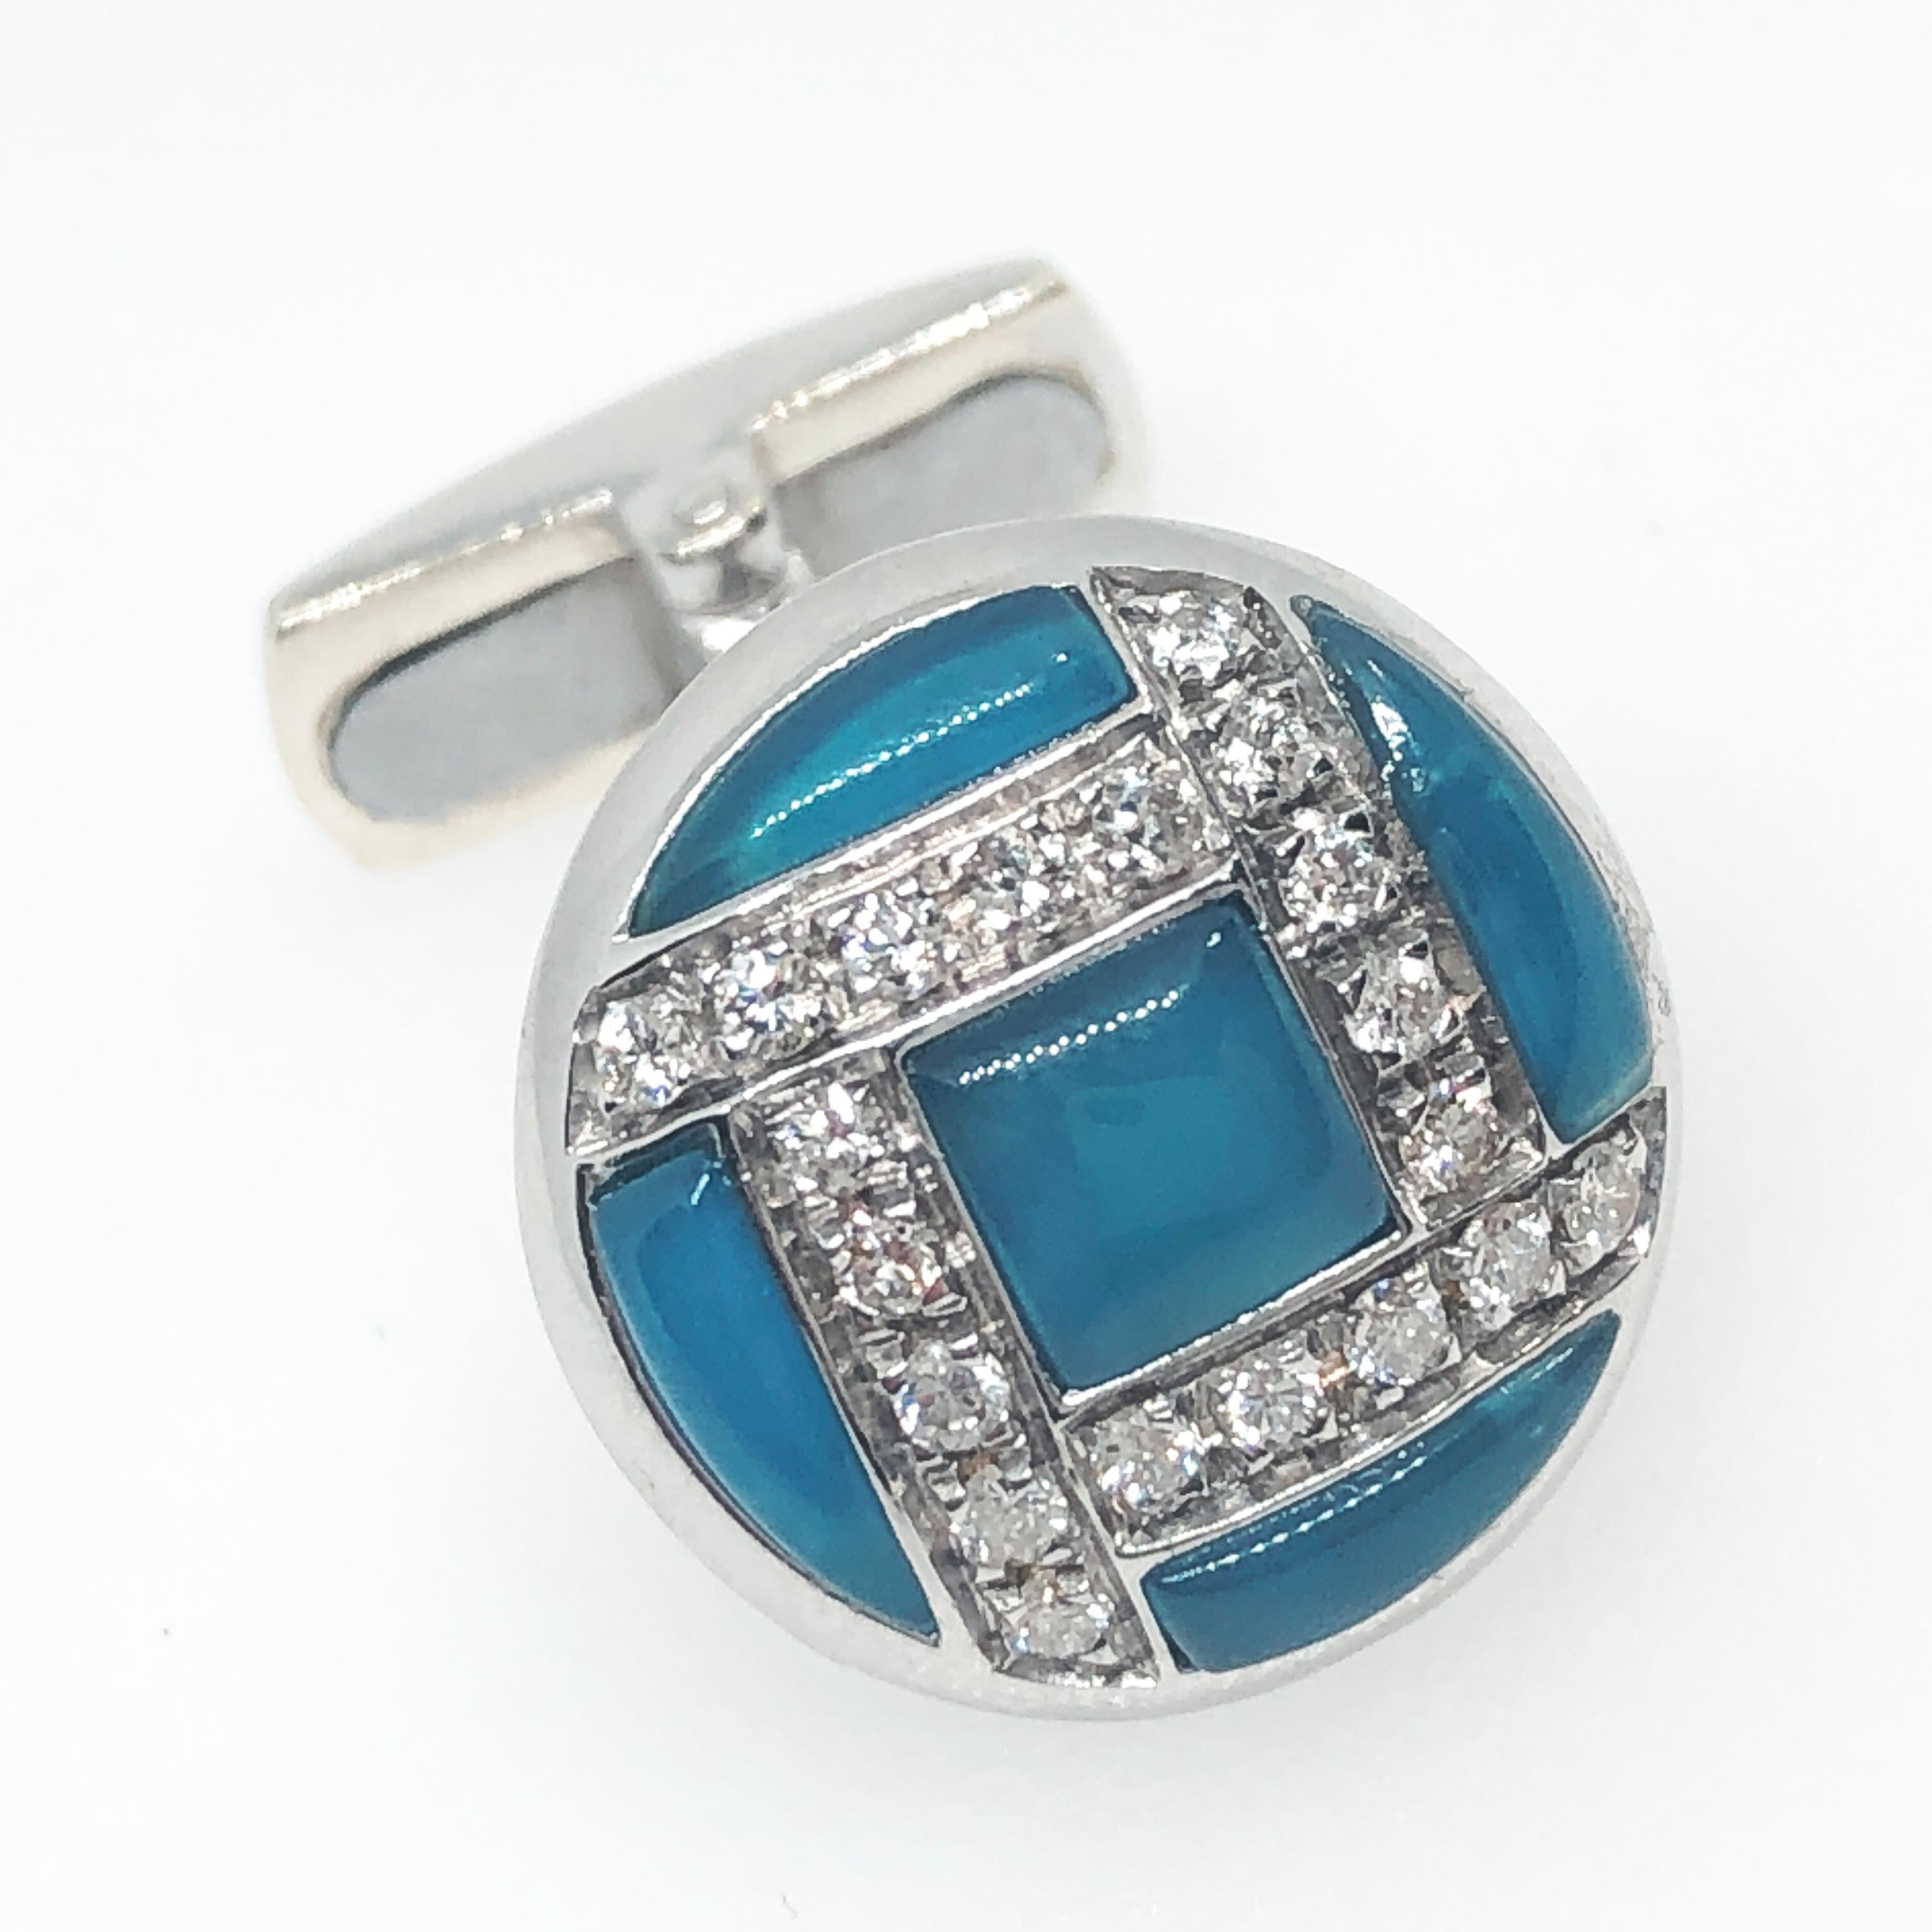 Smart, Unique yet Timeless Cufflinks featuring 0.40Carat White Diamond in a Natural Iridescent Hand Inlaid Blue Chalcedony White Gold Setting, easy to wear T-Bar back.
In our smart Black Box and Pouch.